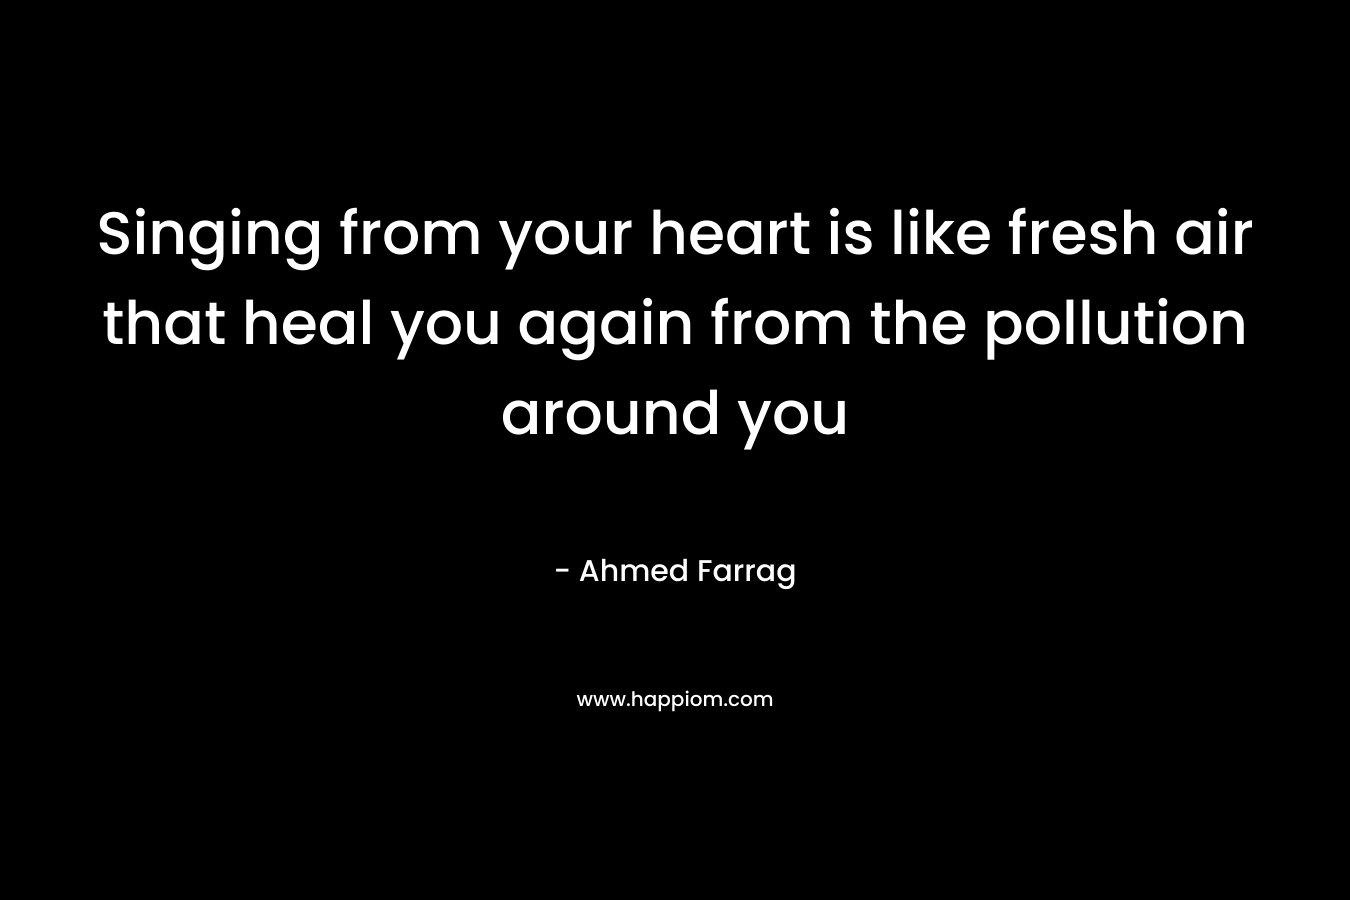 Singing from your heart is like fresh air that heal you again from the pollution around you